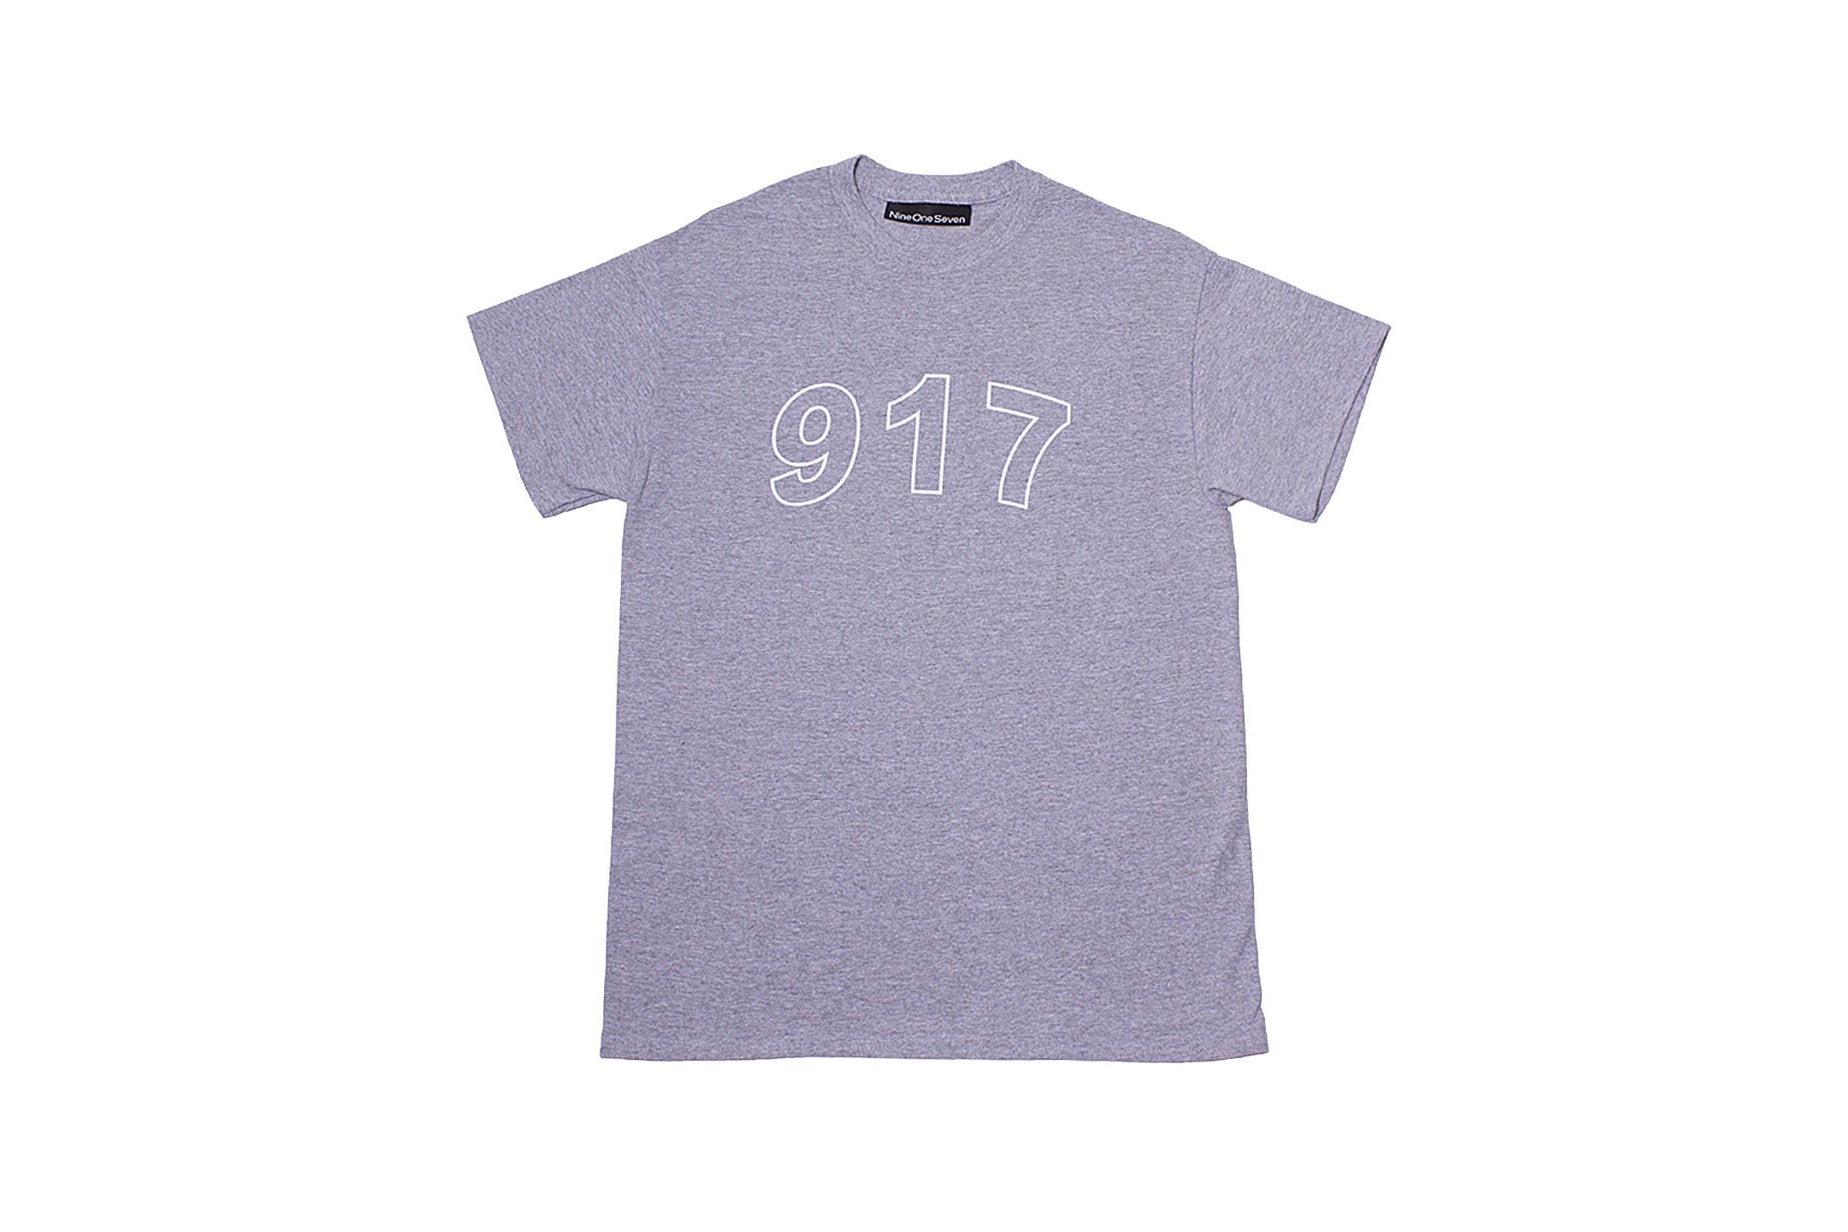 New Call Me 917 Items At Dover Street Market